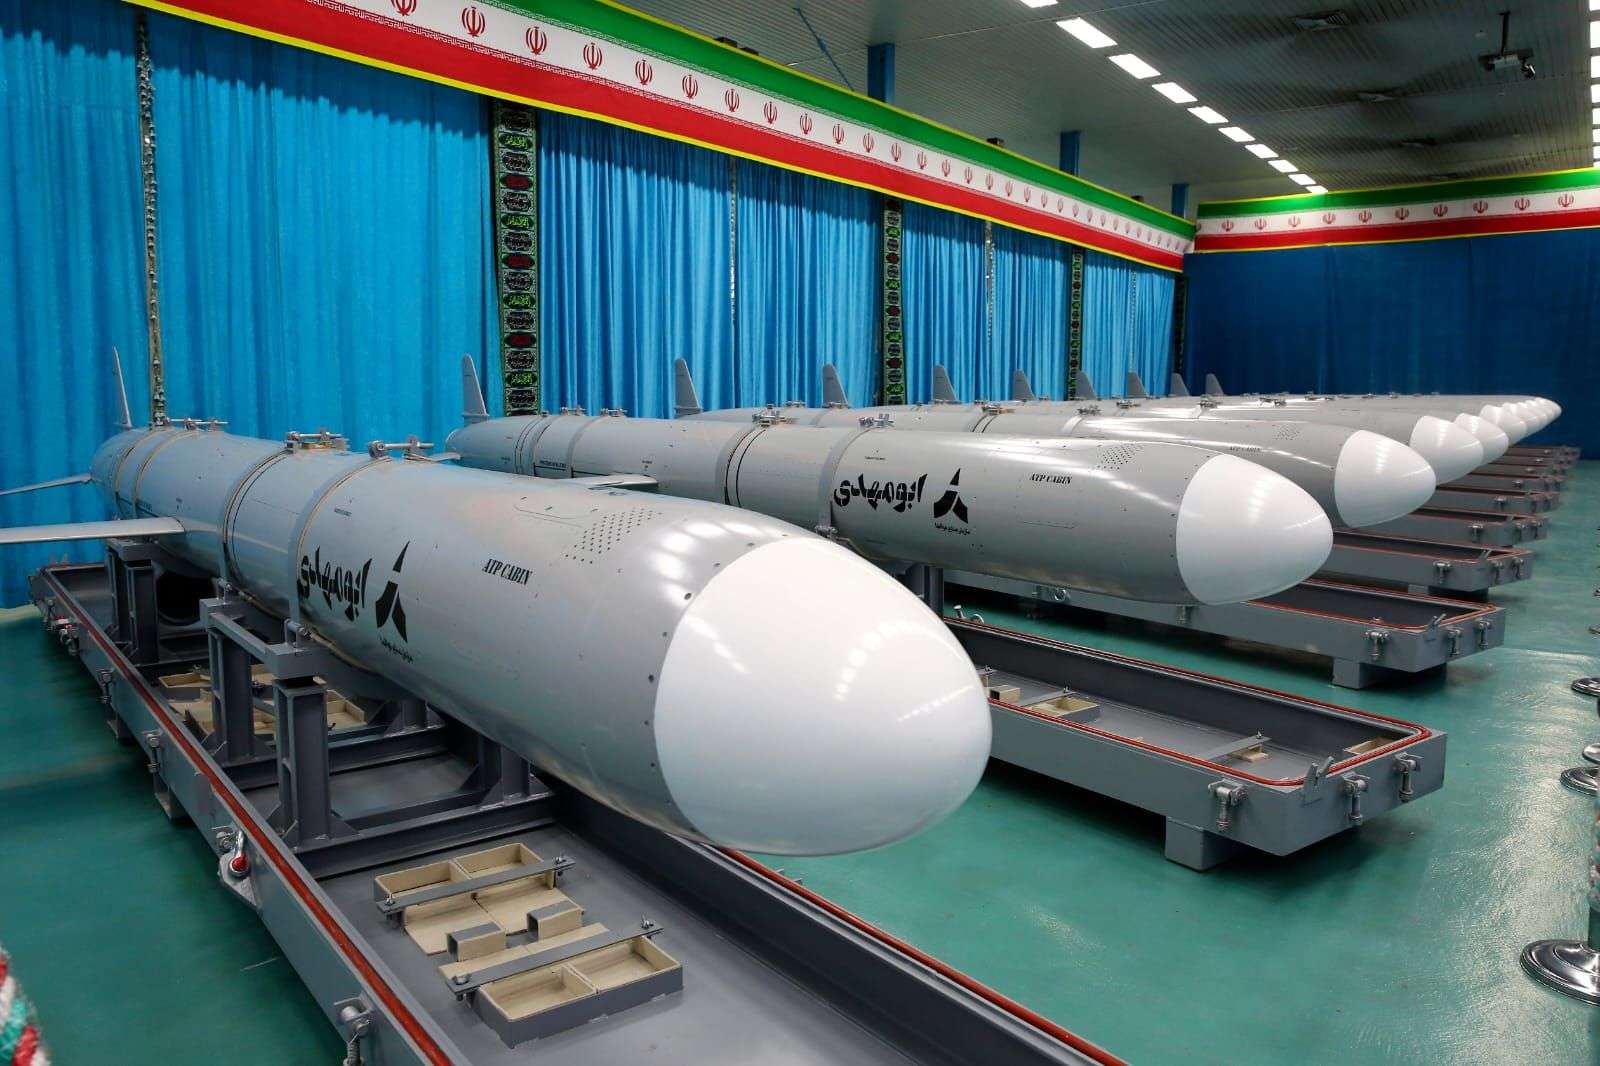 Iranian News Agency Highlights Missiles ‘Capable Of Reaching Israel’